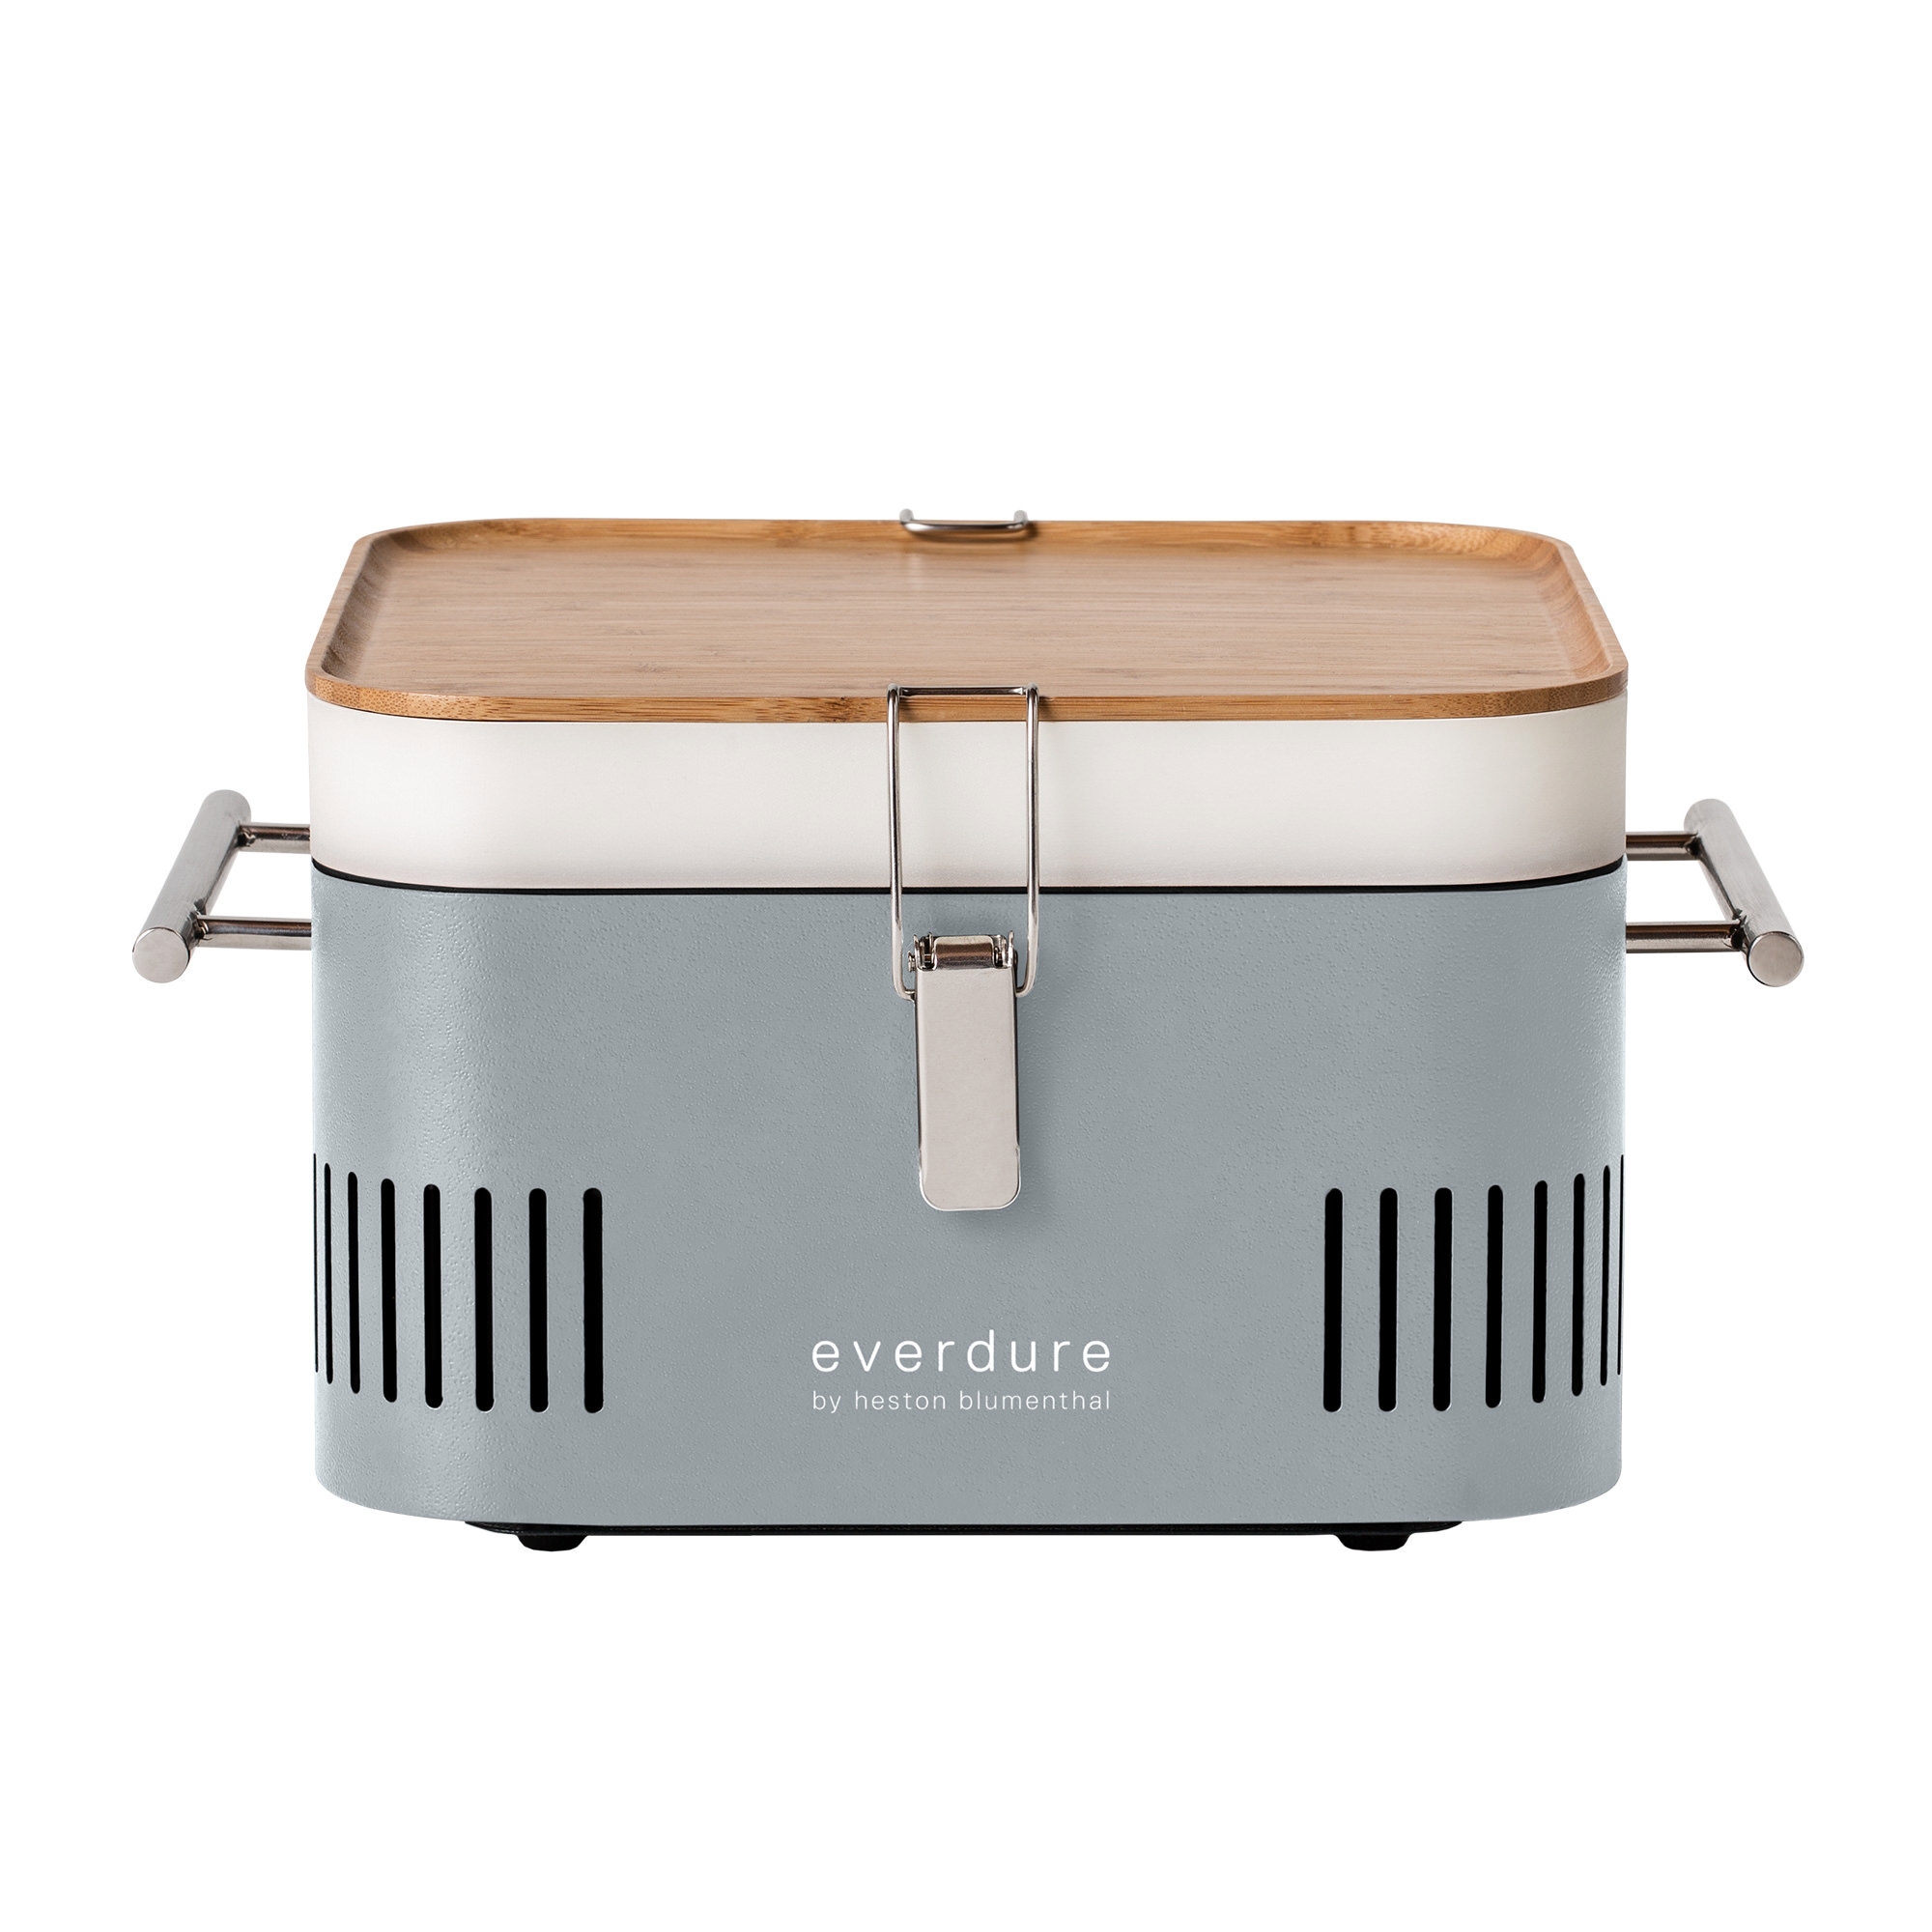 Everdure by Heston Blumenthal CUBE Charcoal Portable BBQ Stone Image 1